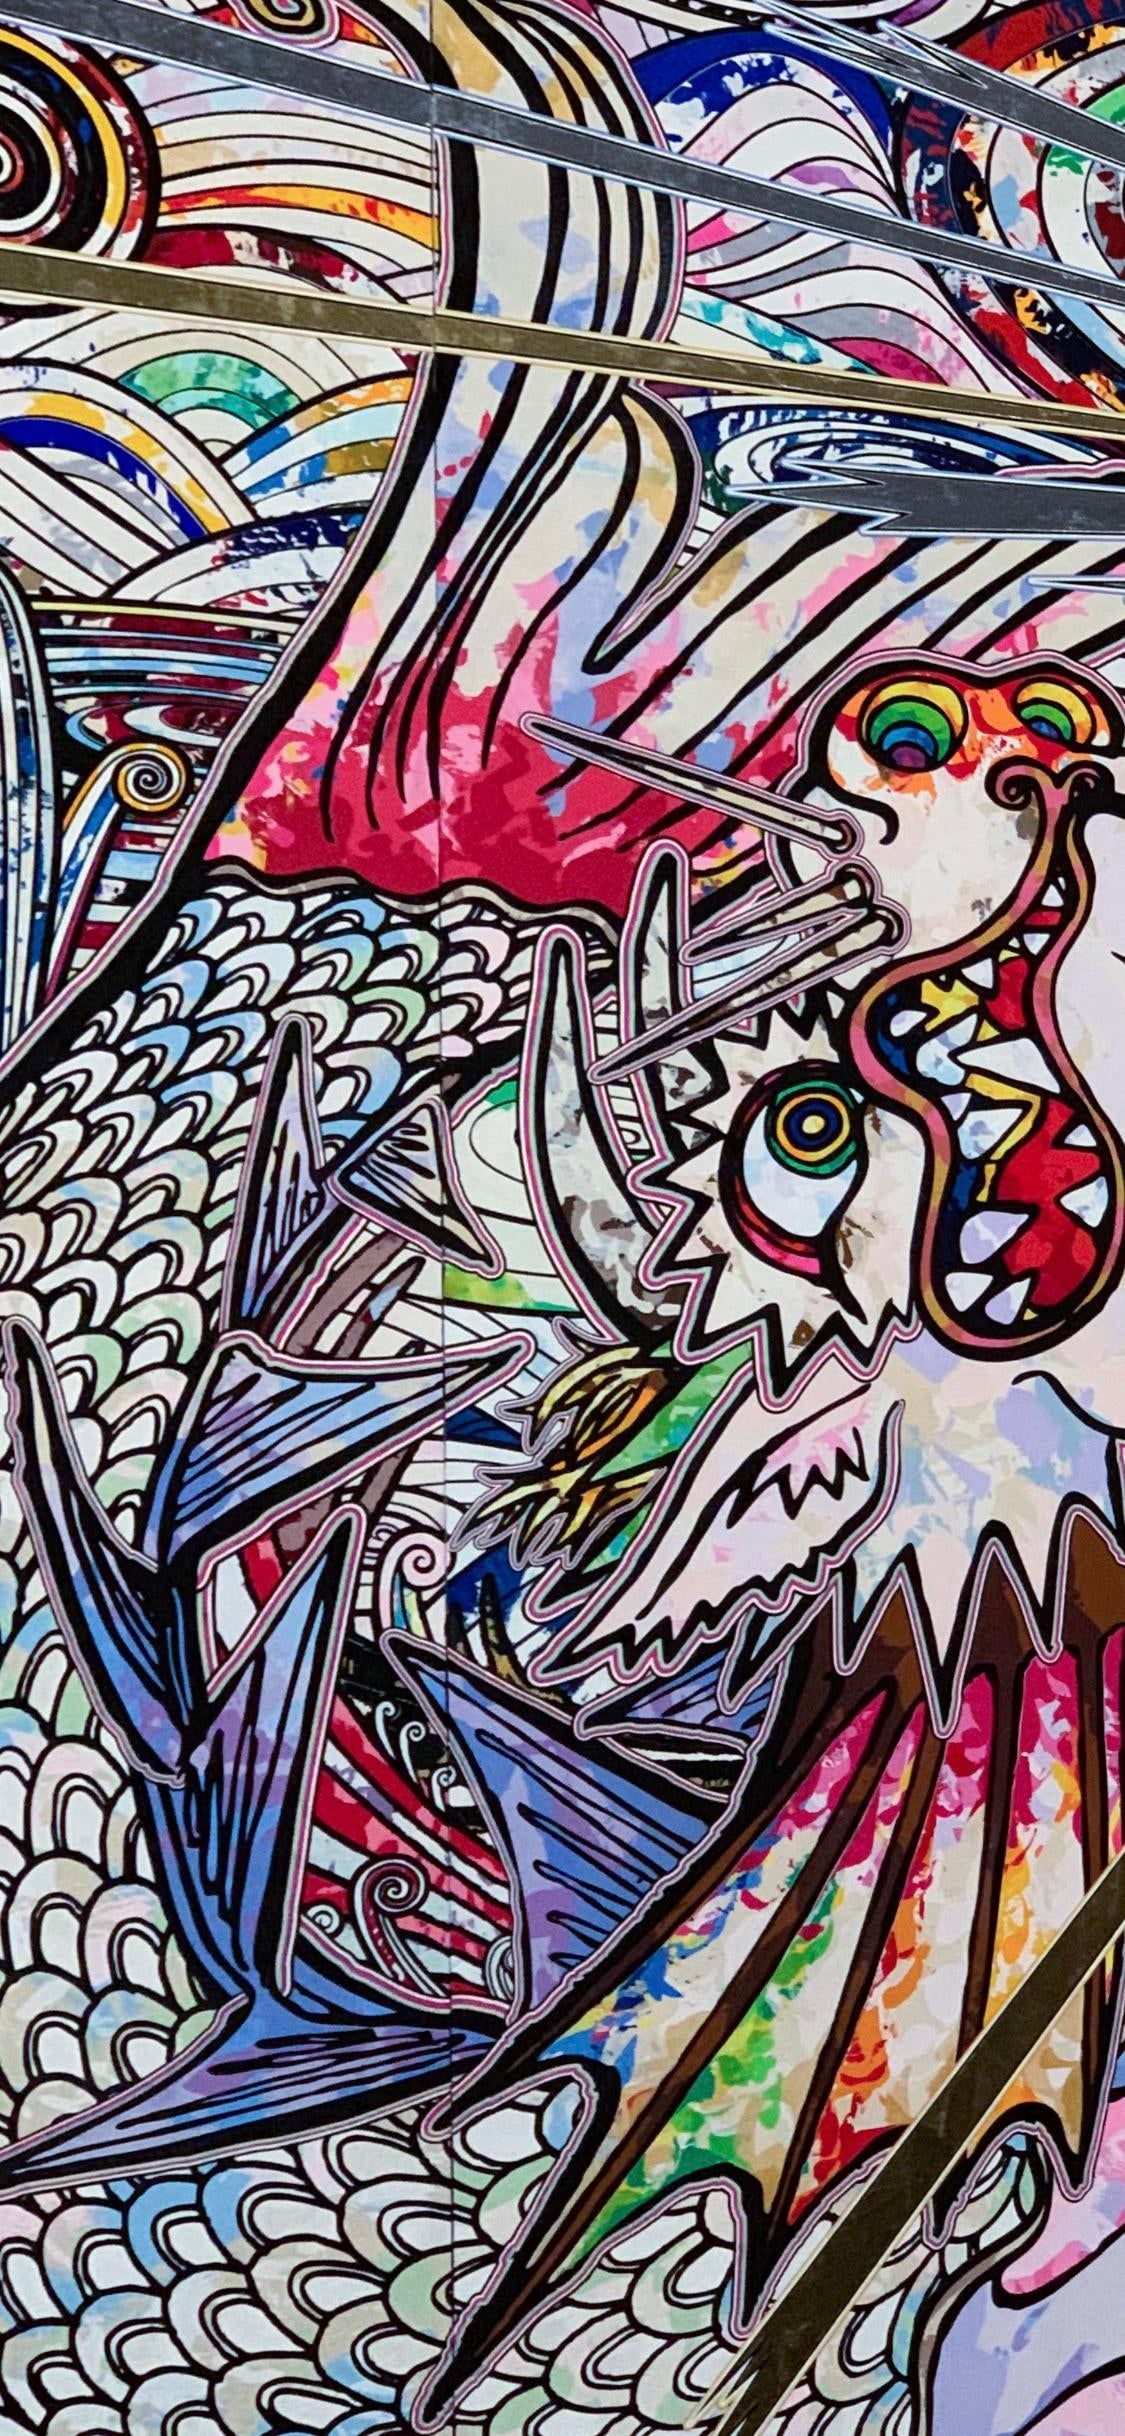 My current XS Max wallpaper I snapped of a Murakami Takashi mural—Link to OG post (w/ details) in comments since crossposting didn't work